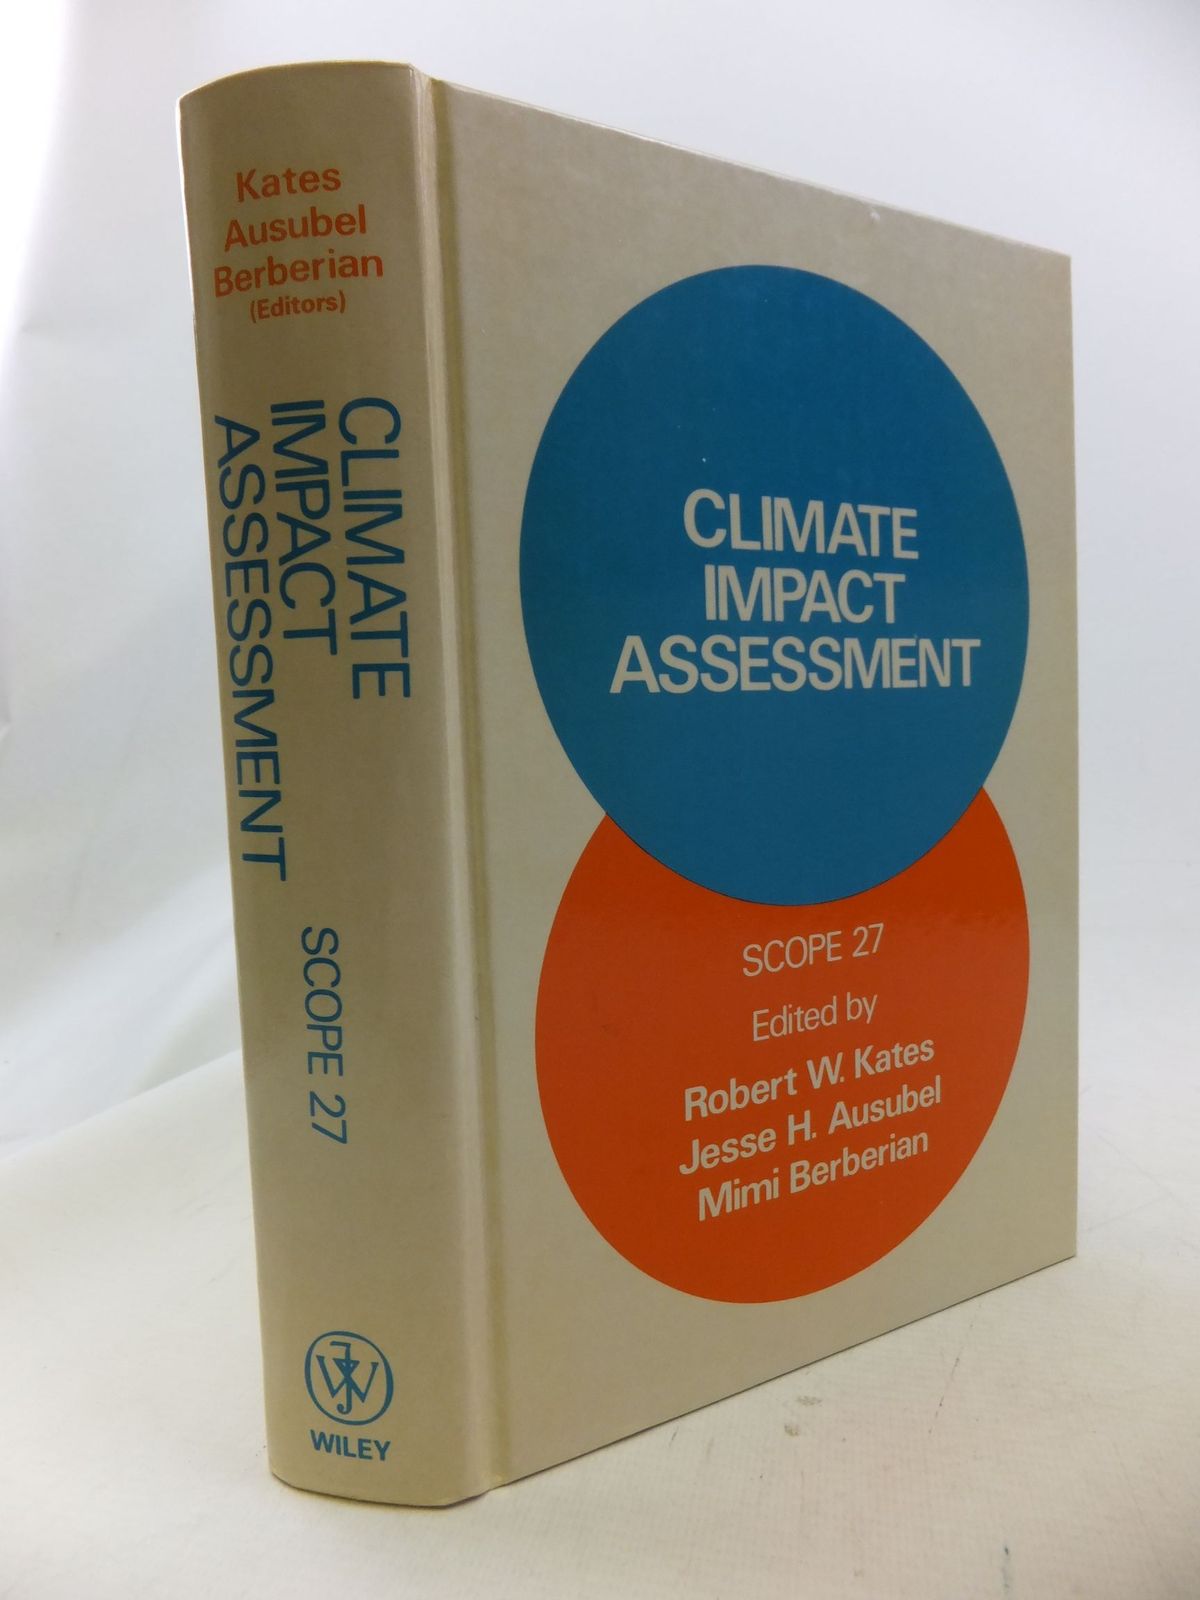 Photo of CLIMATE IMPACT ASSESSMENT written by Kates, Robert W.
Ausubel, Jesse H.
Berberian, Mimi published by John Wiley & Sons (STOCK CODE: 1710901)  for sale by Stella & Rose's Books